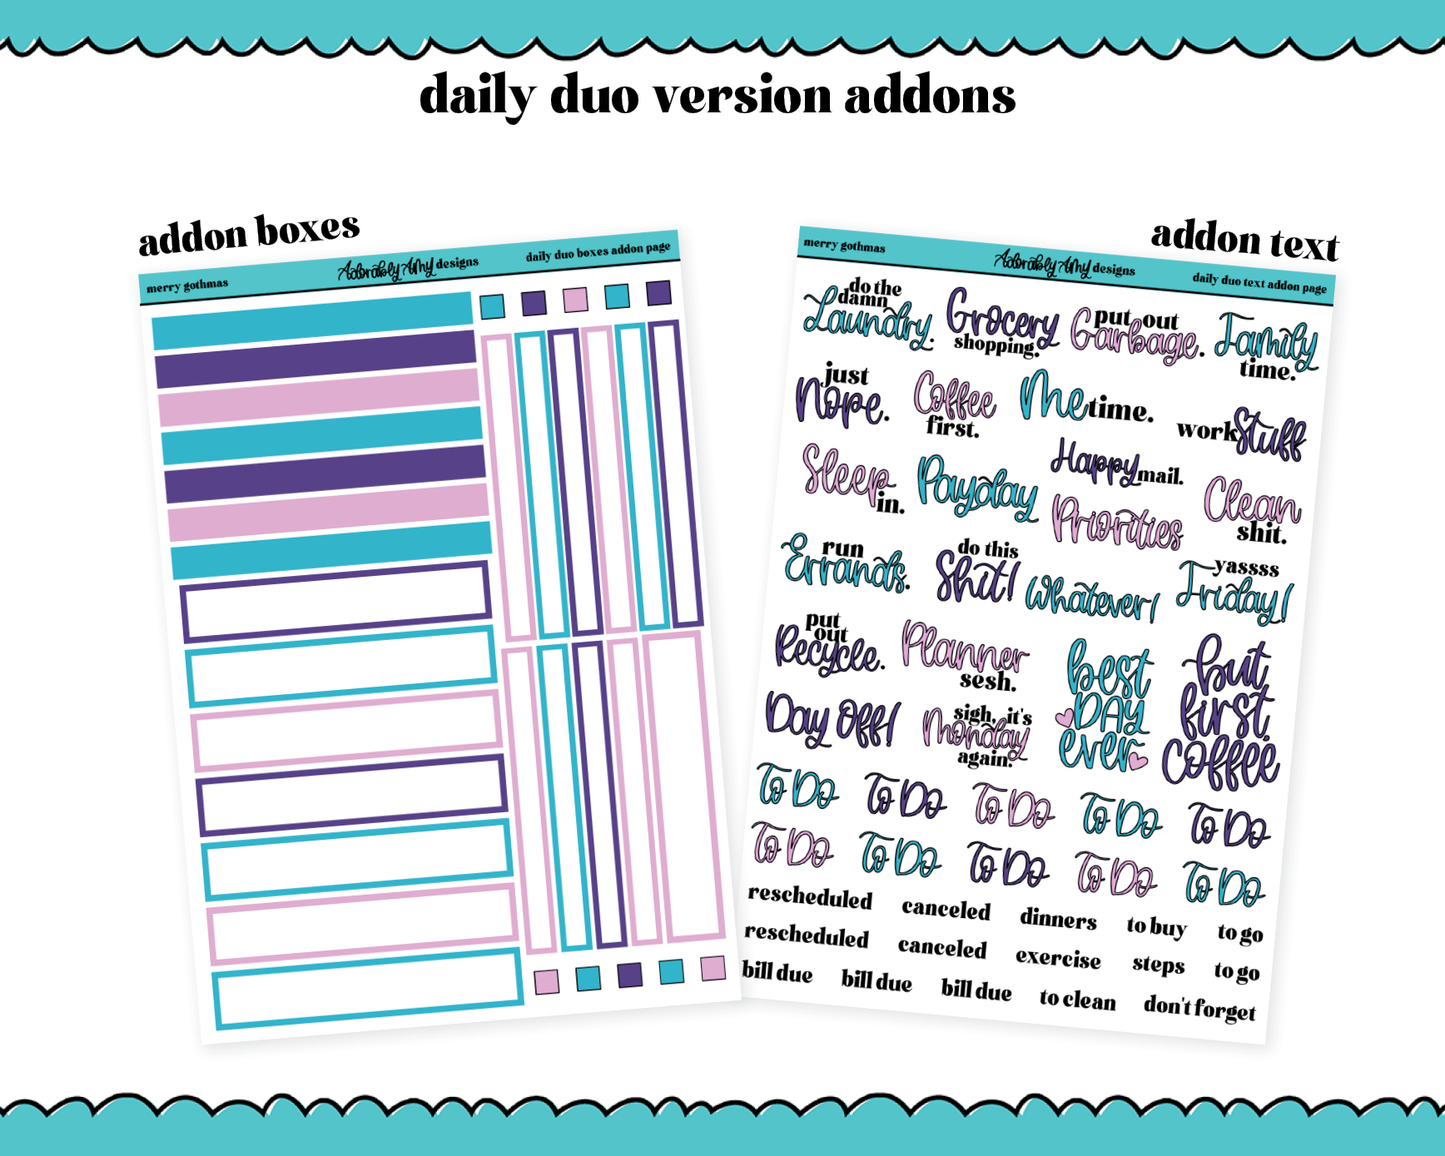 Daily Duo Merry Gothmas Christmas Themed Weekly Planner Sticker Kit for Daily Duo Planner